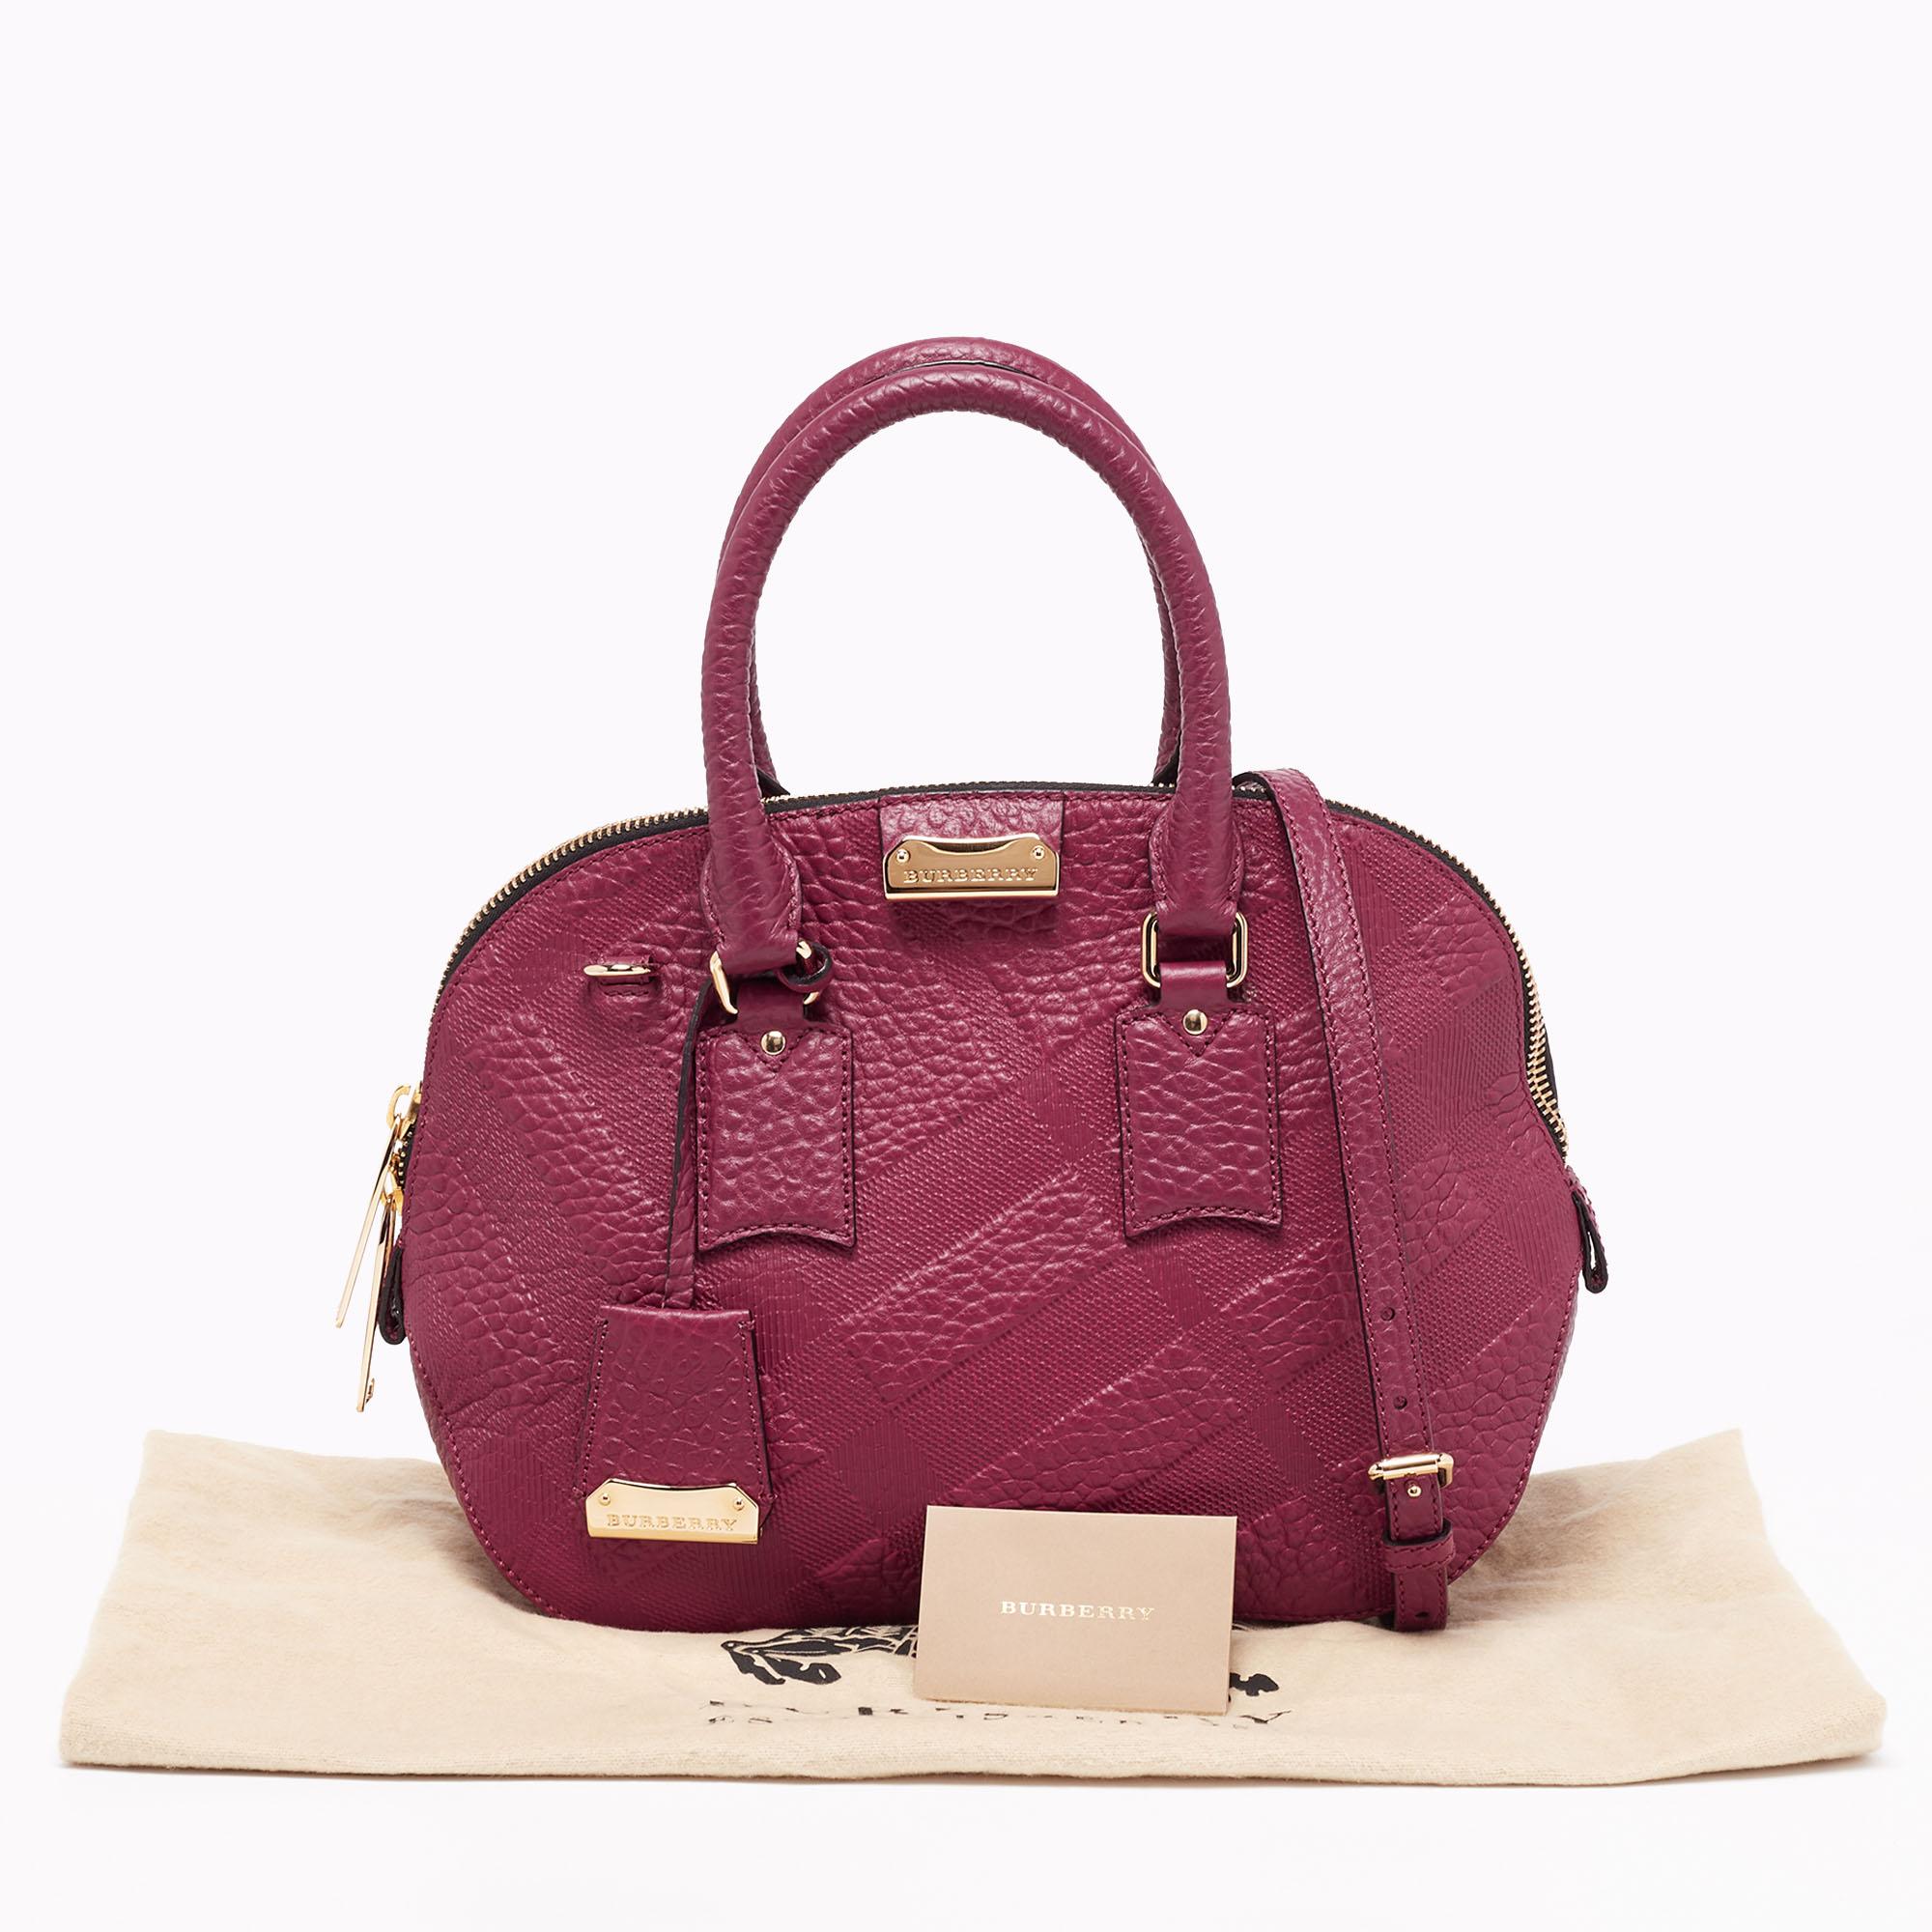 Burberry Burgundy Leather Orchard Bowling Bag 4